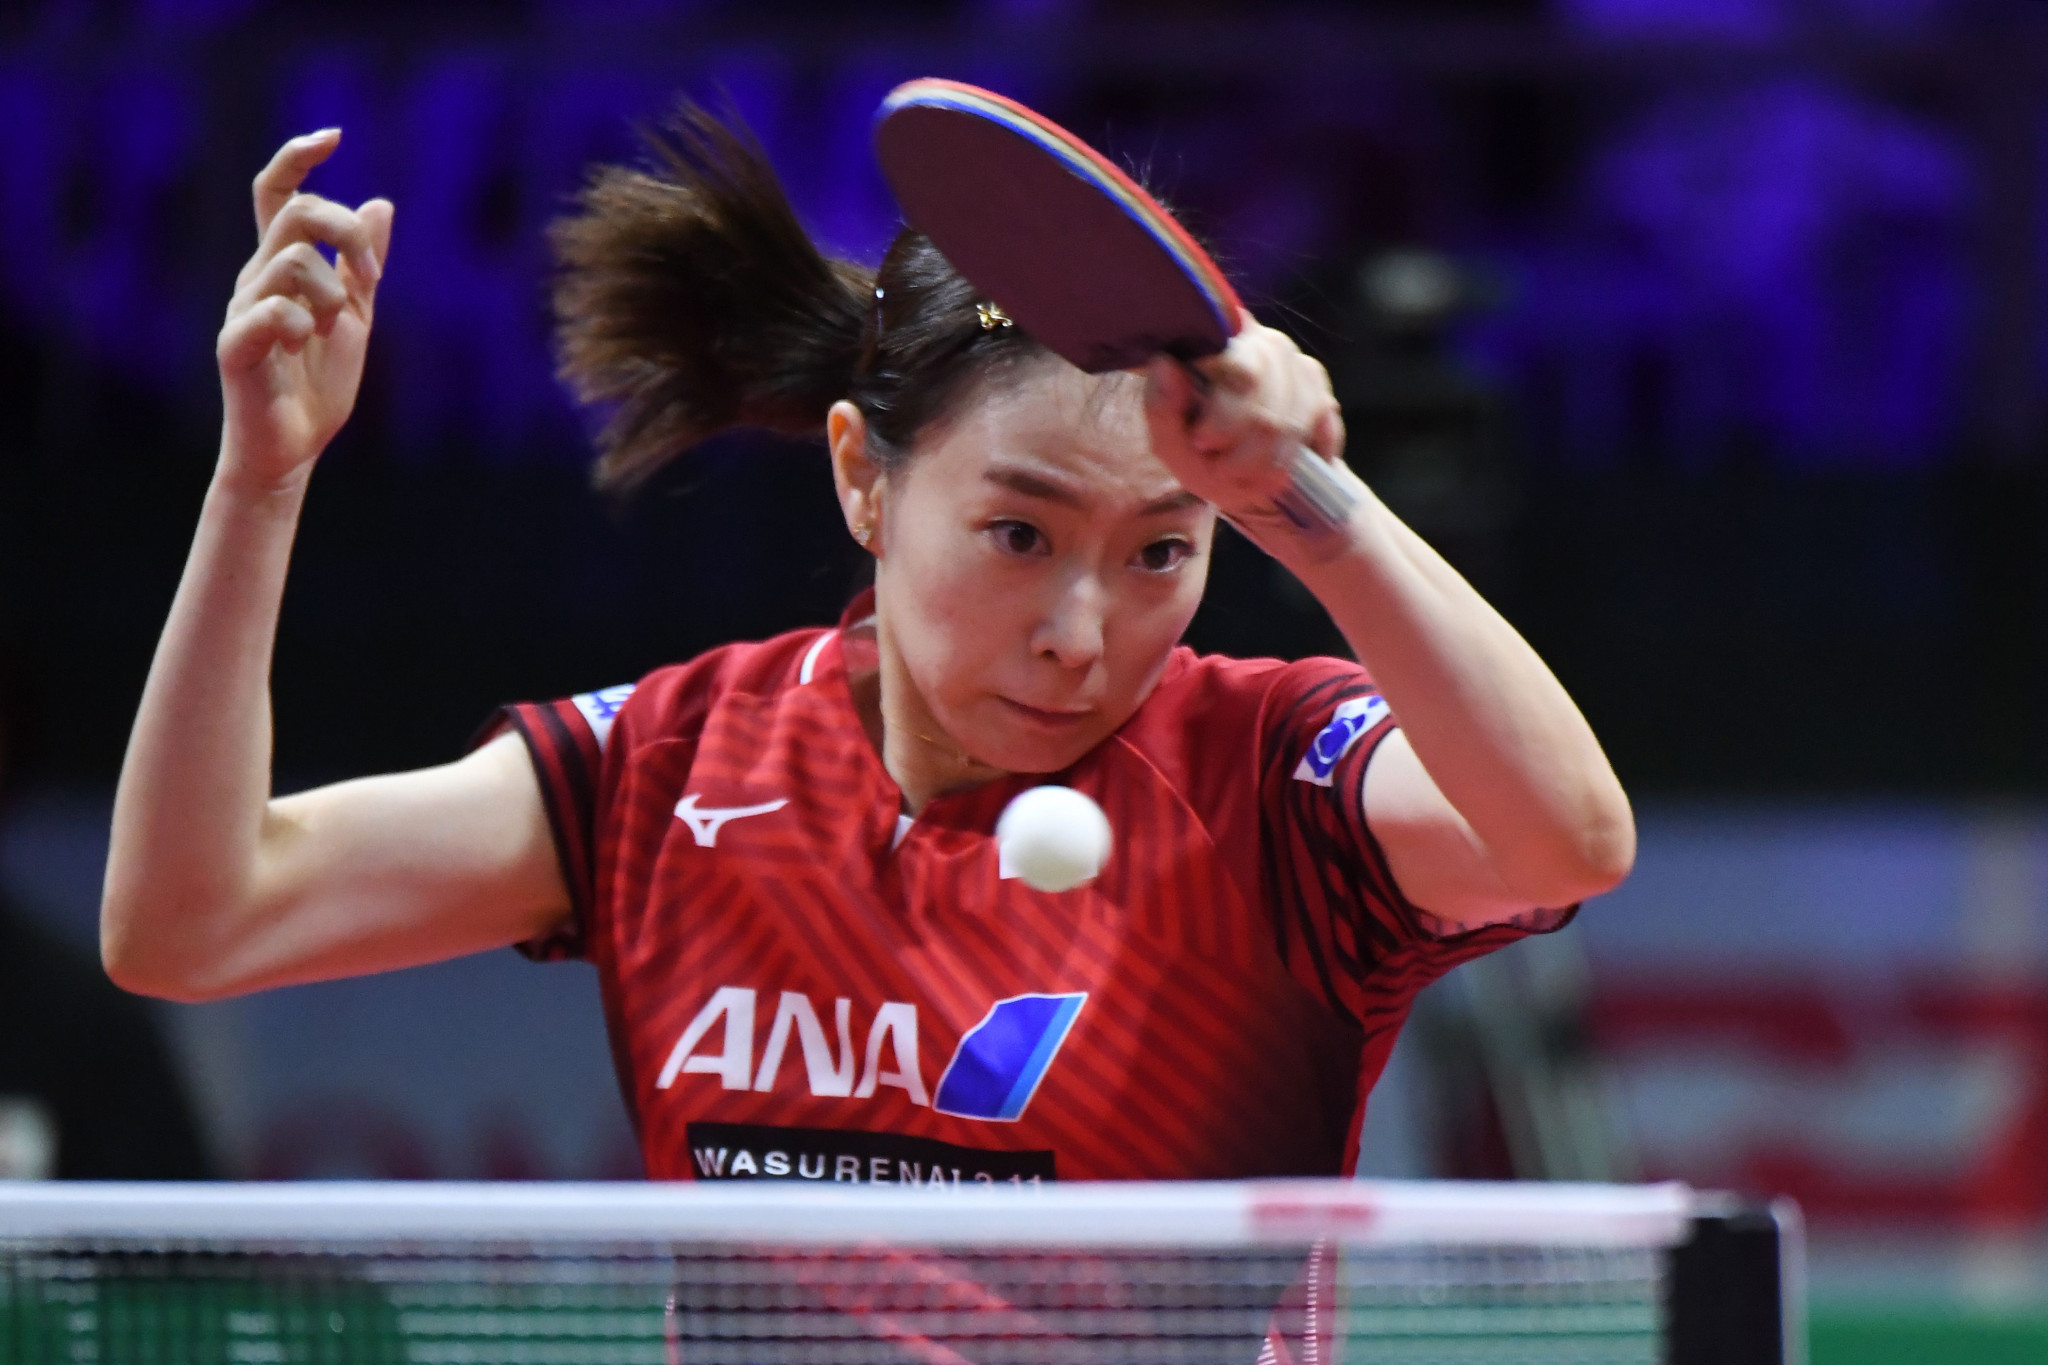 Top seed Kasumi Ishikawa of Japan will meet Portugal's Shao Jieni in the first round of the women's singles event ©Getty Images